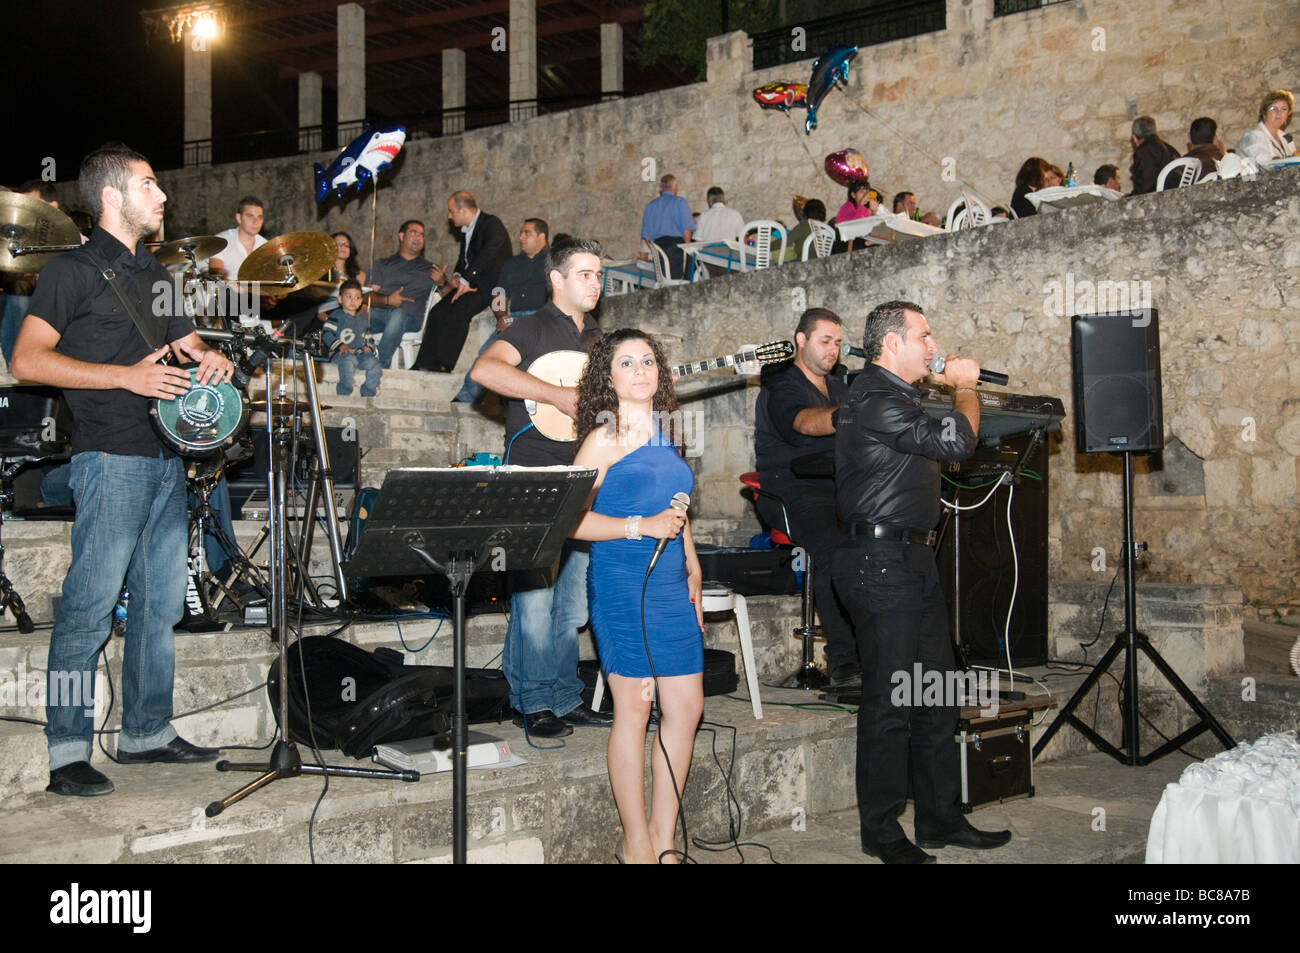 Cyprus Lysos A typical Cypriot Greek wedding in the town square Stock Photo